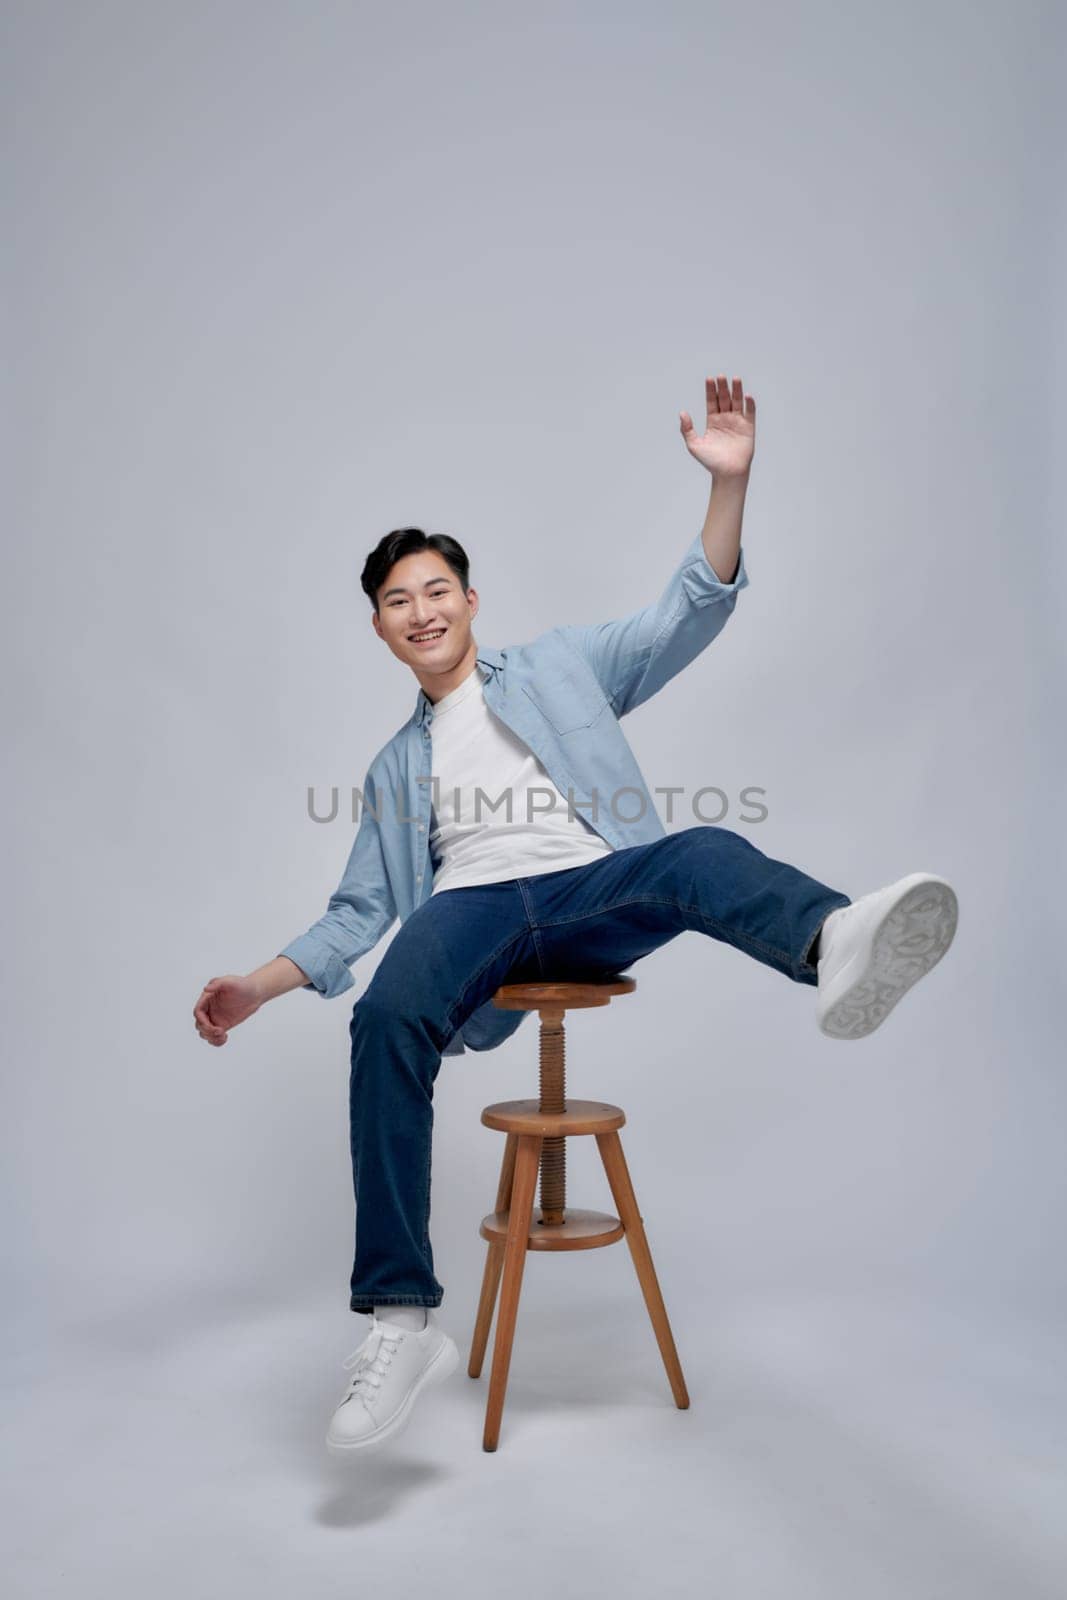 Photo portrait young man smiling sitting on wooden chair isolated on white background by makidotvn